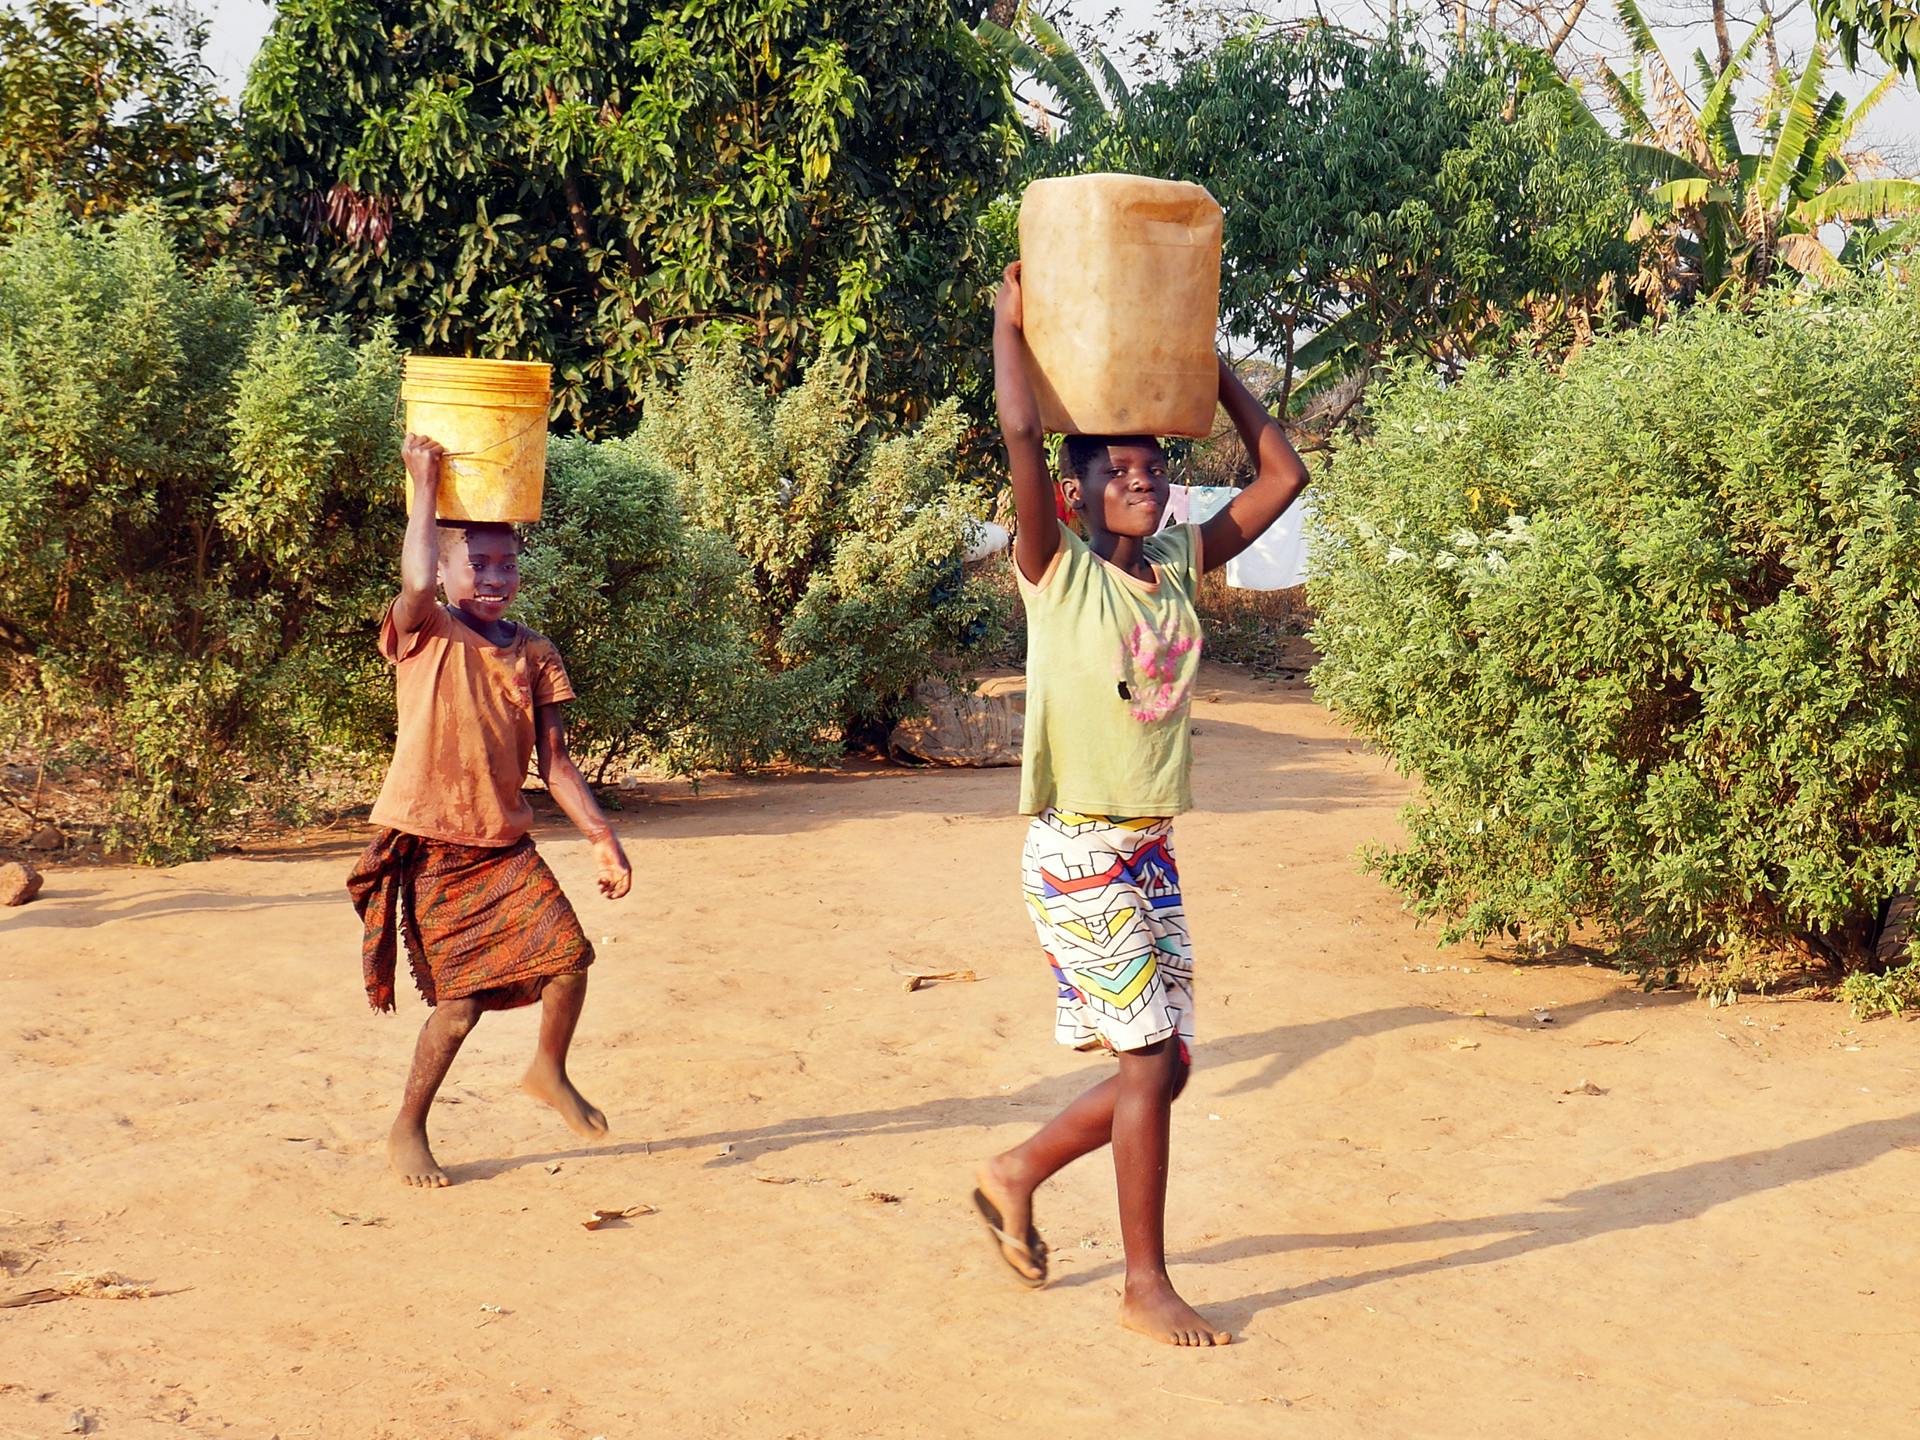 Two Zambian children carrying water containers on their heads.